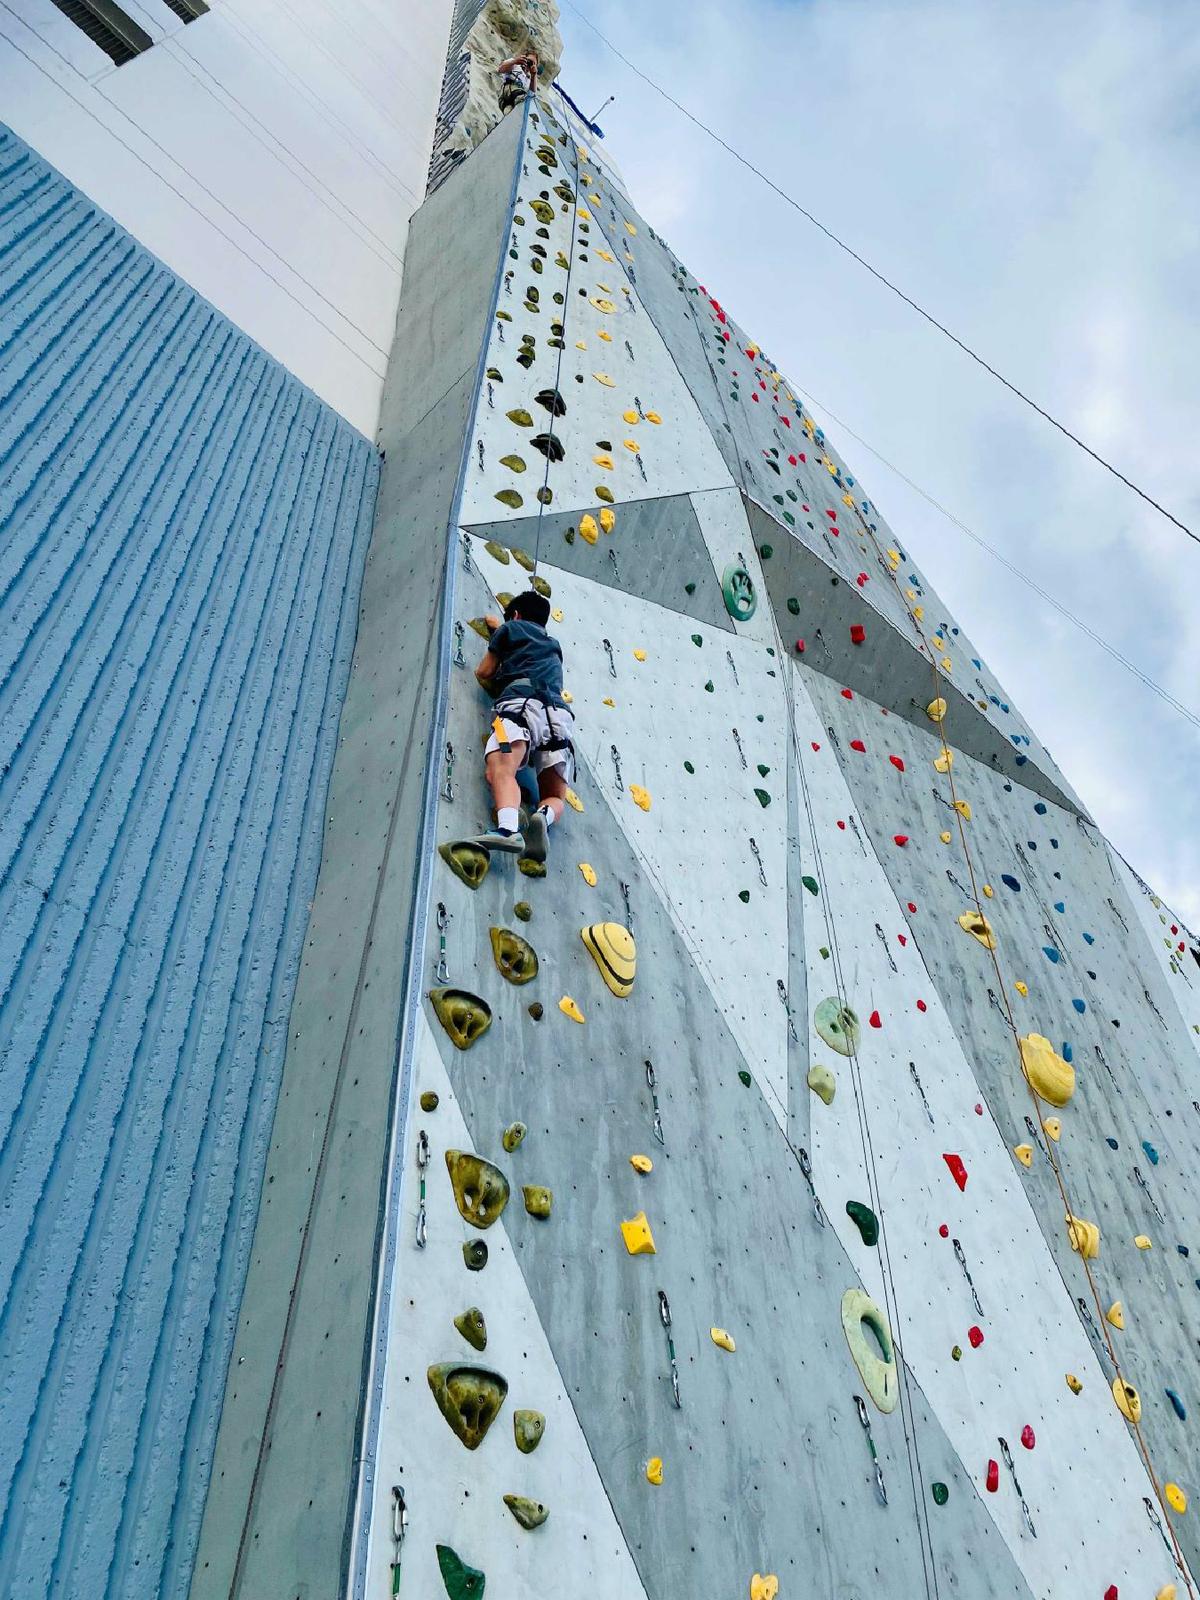  A climber tries his luck over downtown Reno, Nevada. (Photo courtesy of Margot Black.)